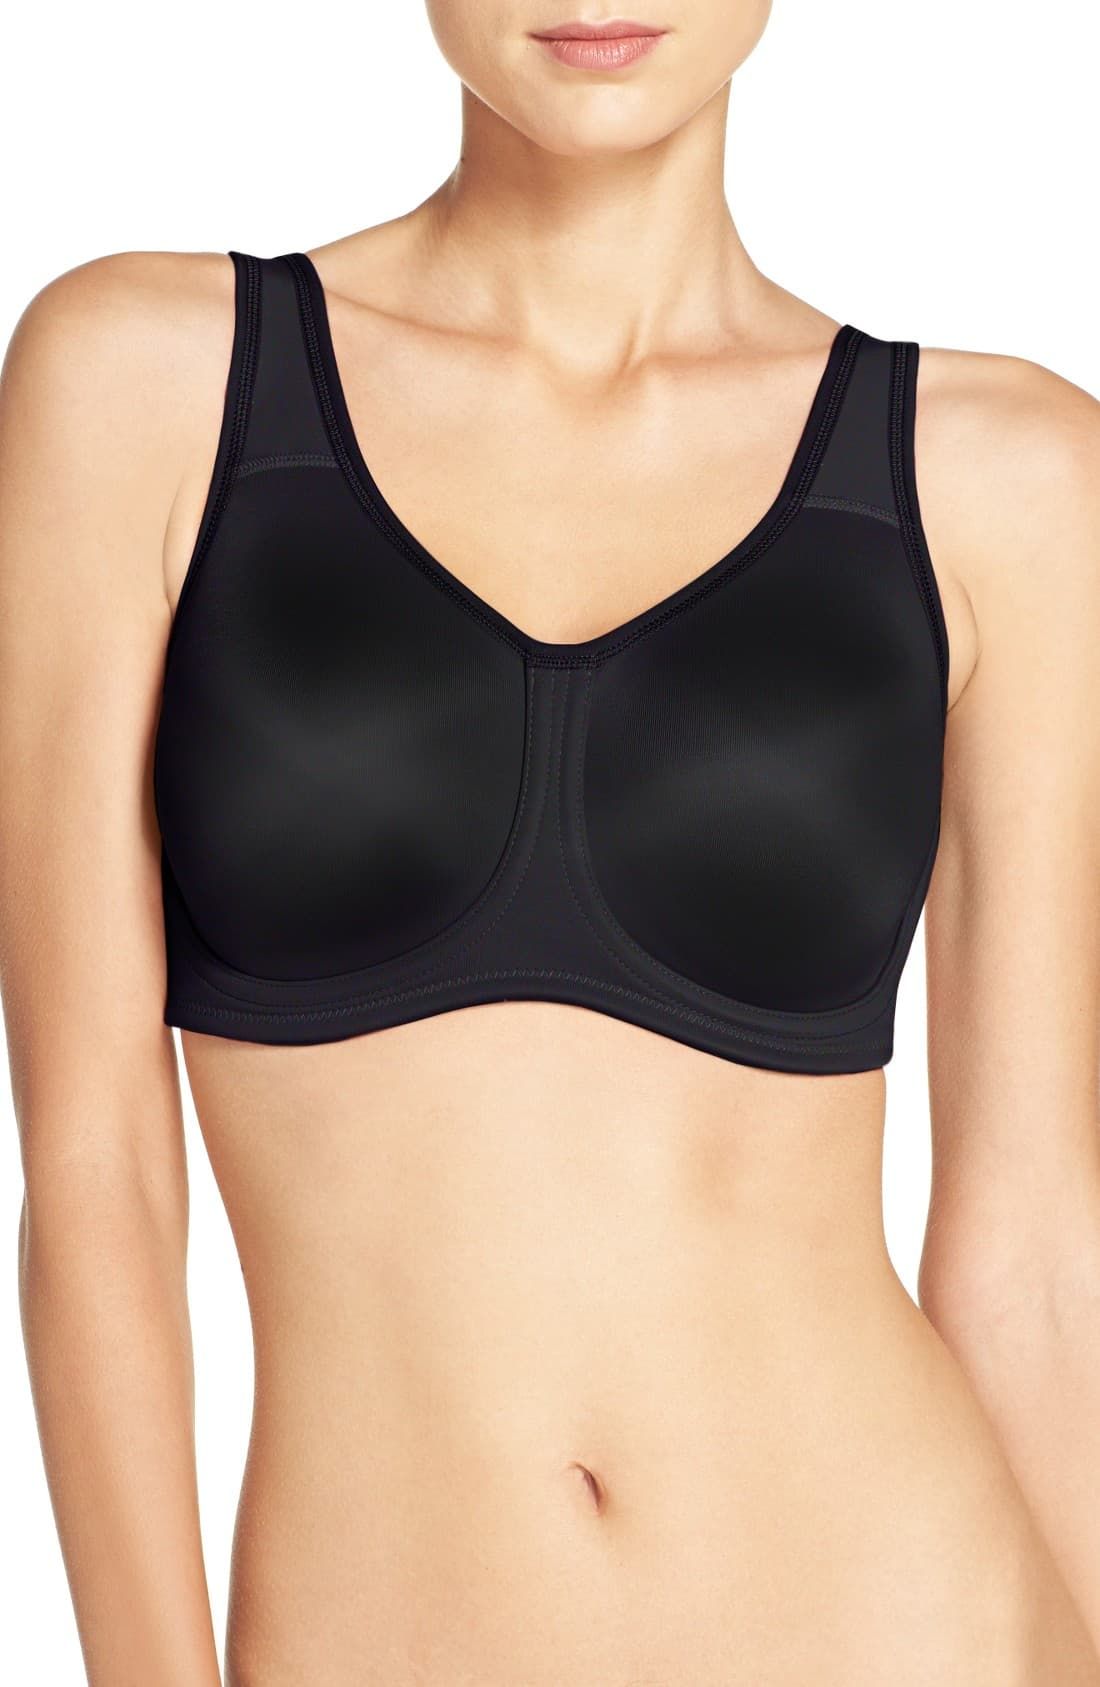 best sports bra for large bust running